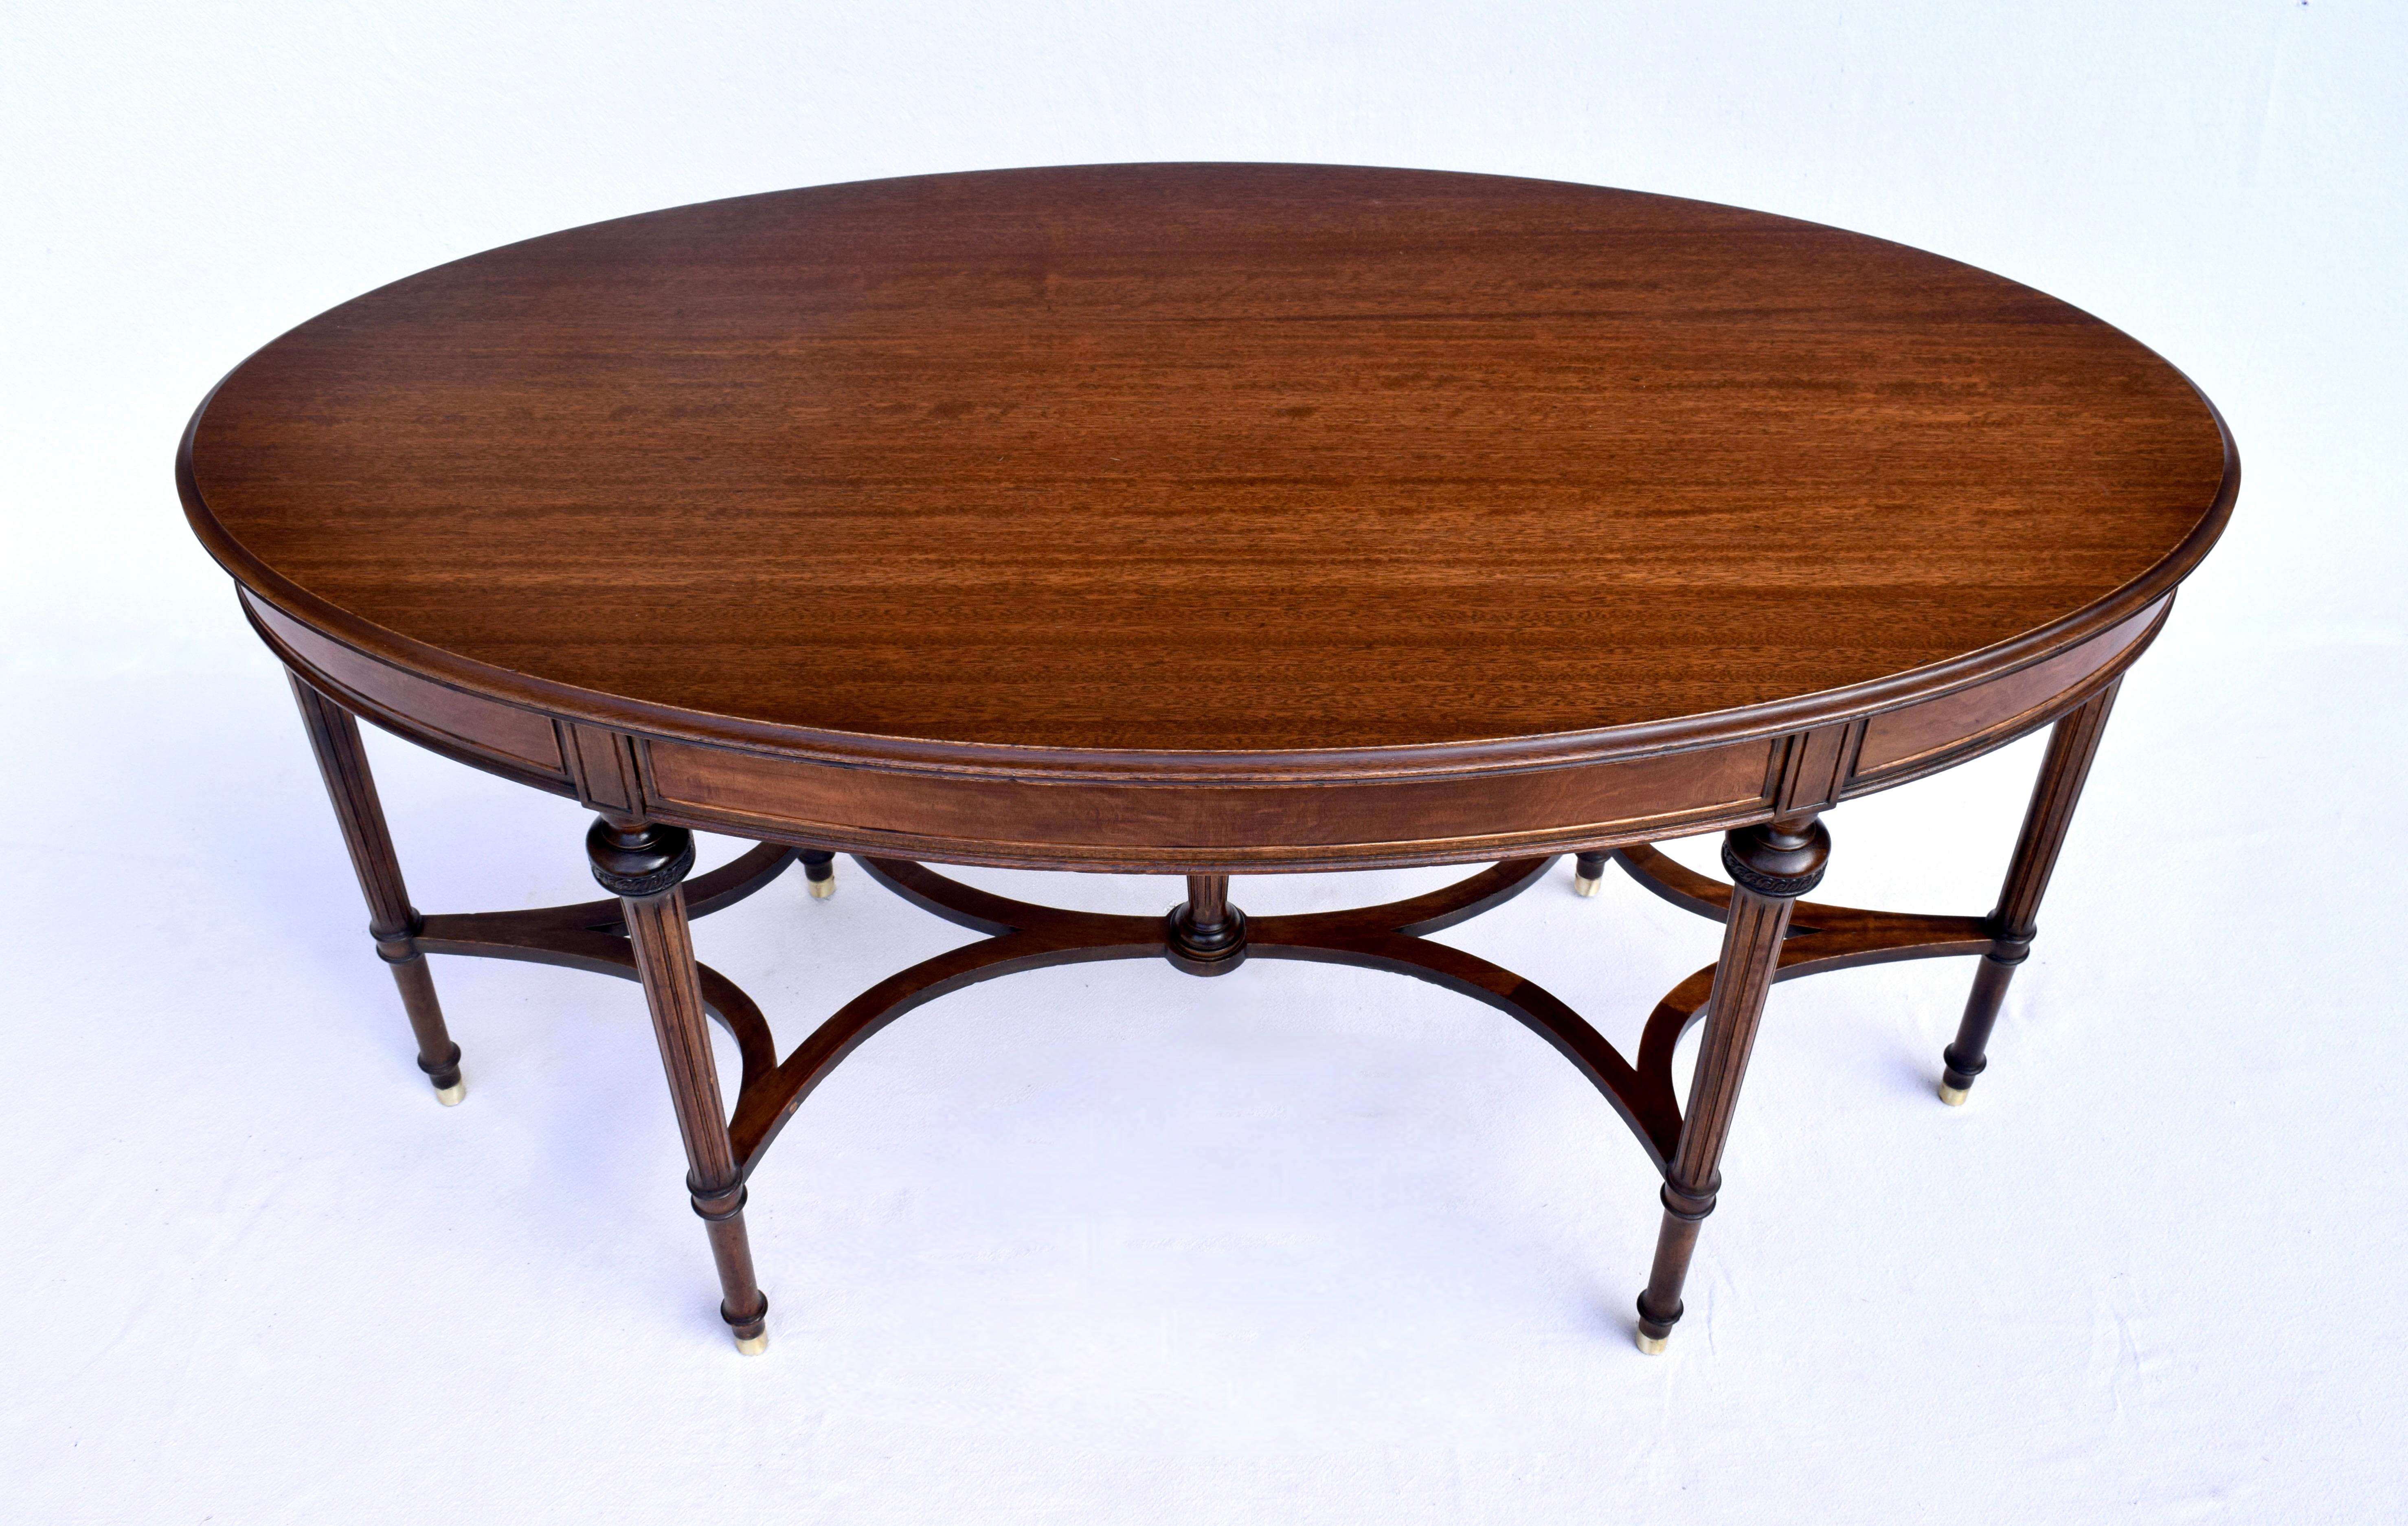 An exquisite Louis XVI style Mahogany oval table with a single hidden drawer, striking double reverse quatrefoil stretcher & six brass capped legs. Gorgeous grains with satinwood veneers on all sides the table renders marvelous multifunction,